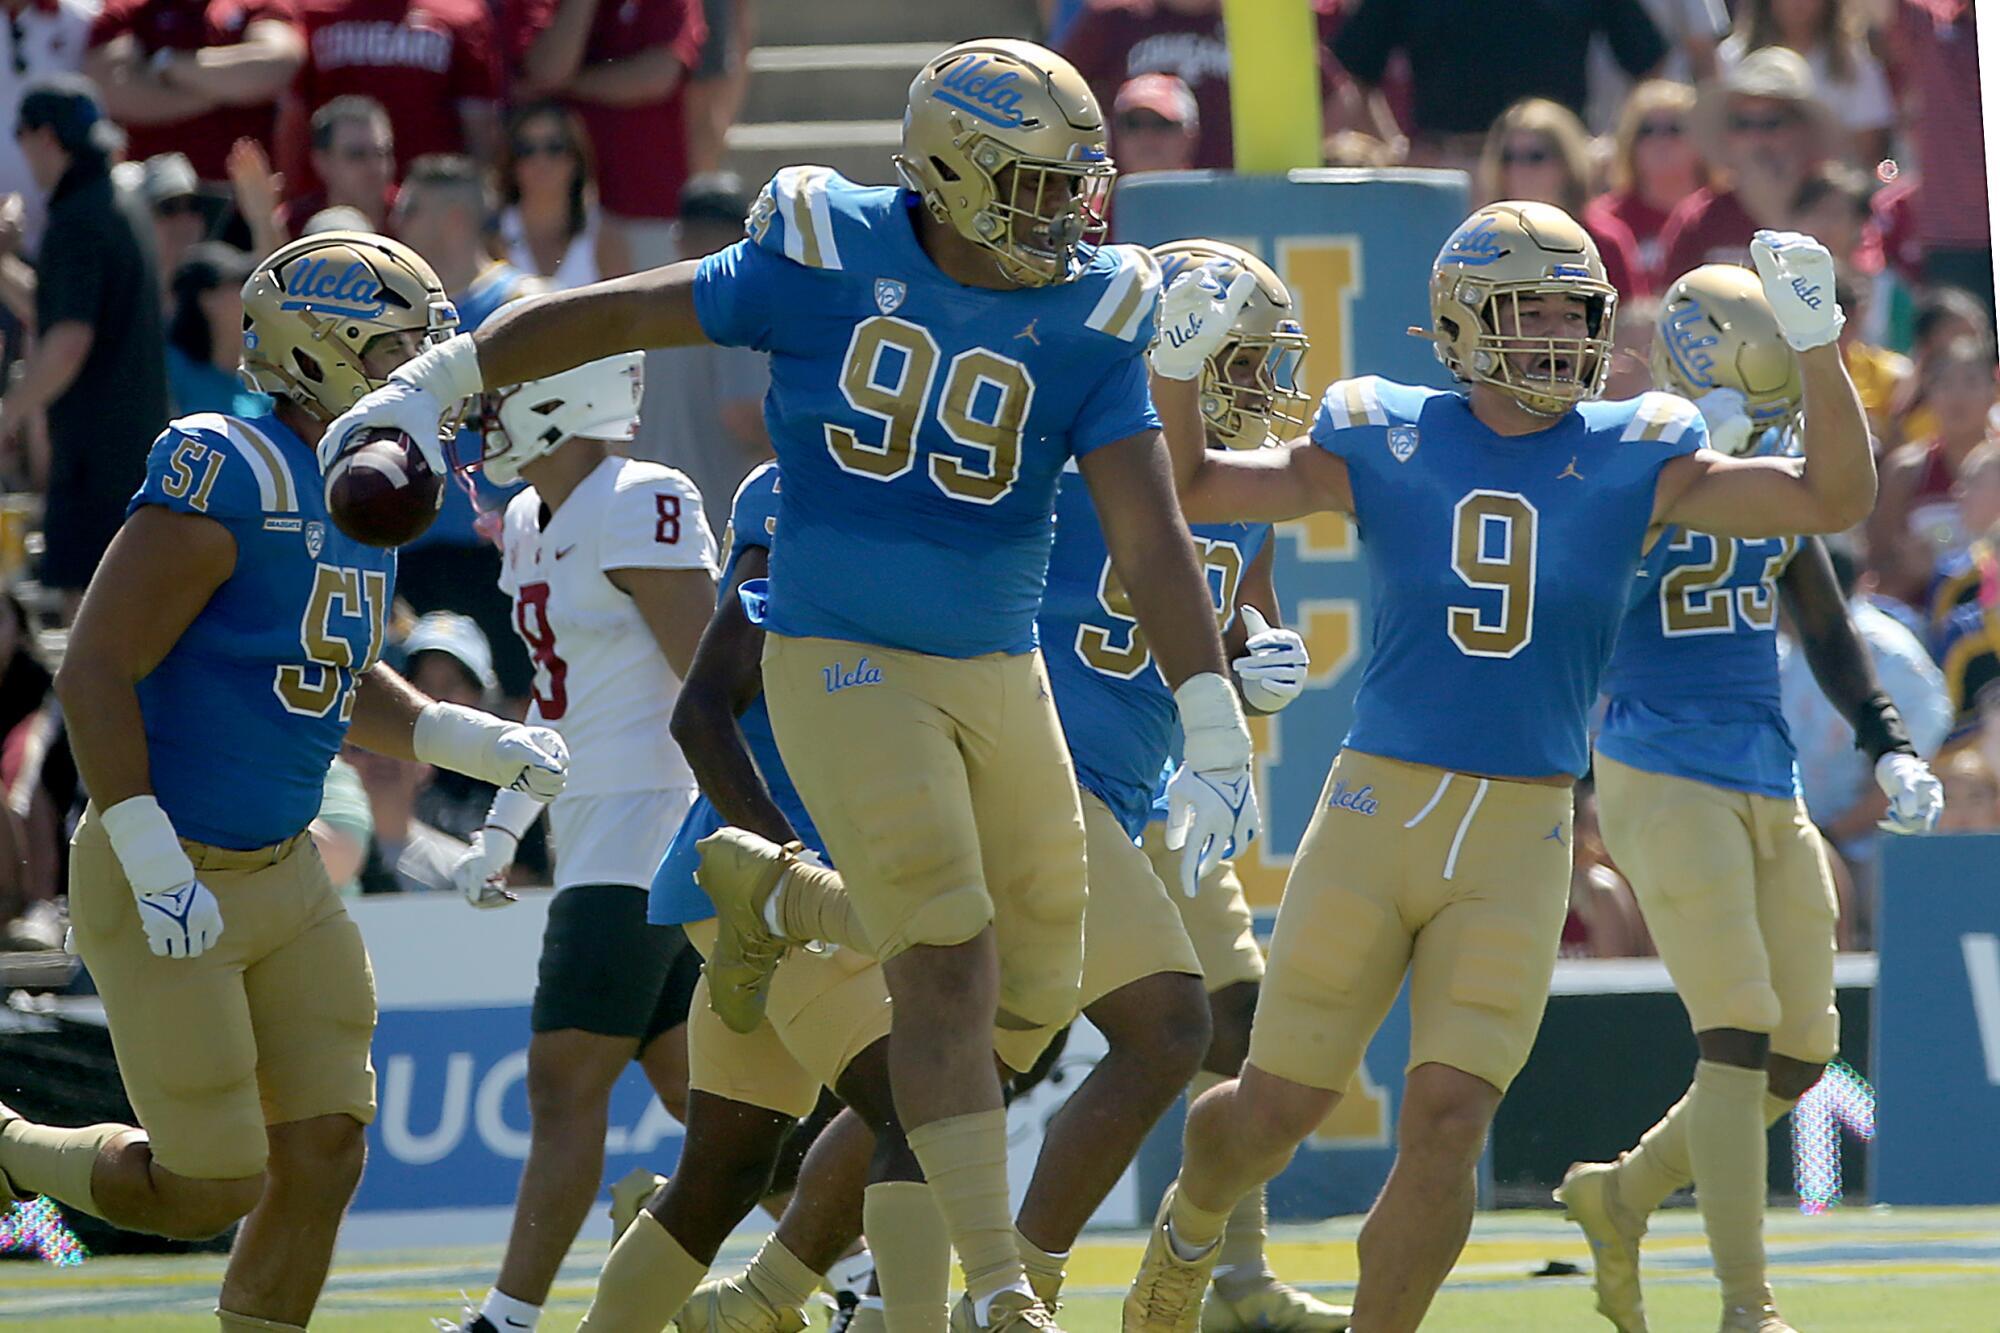 UCLA defensive lineman Keanu Williams (99) celebrates after recovering a fumble by Washington State's Cameron Williams.